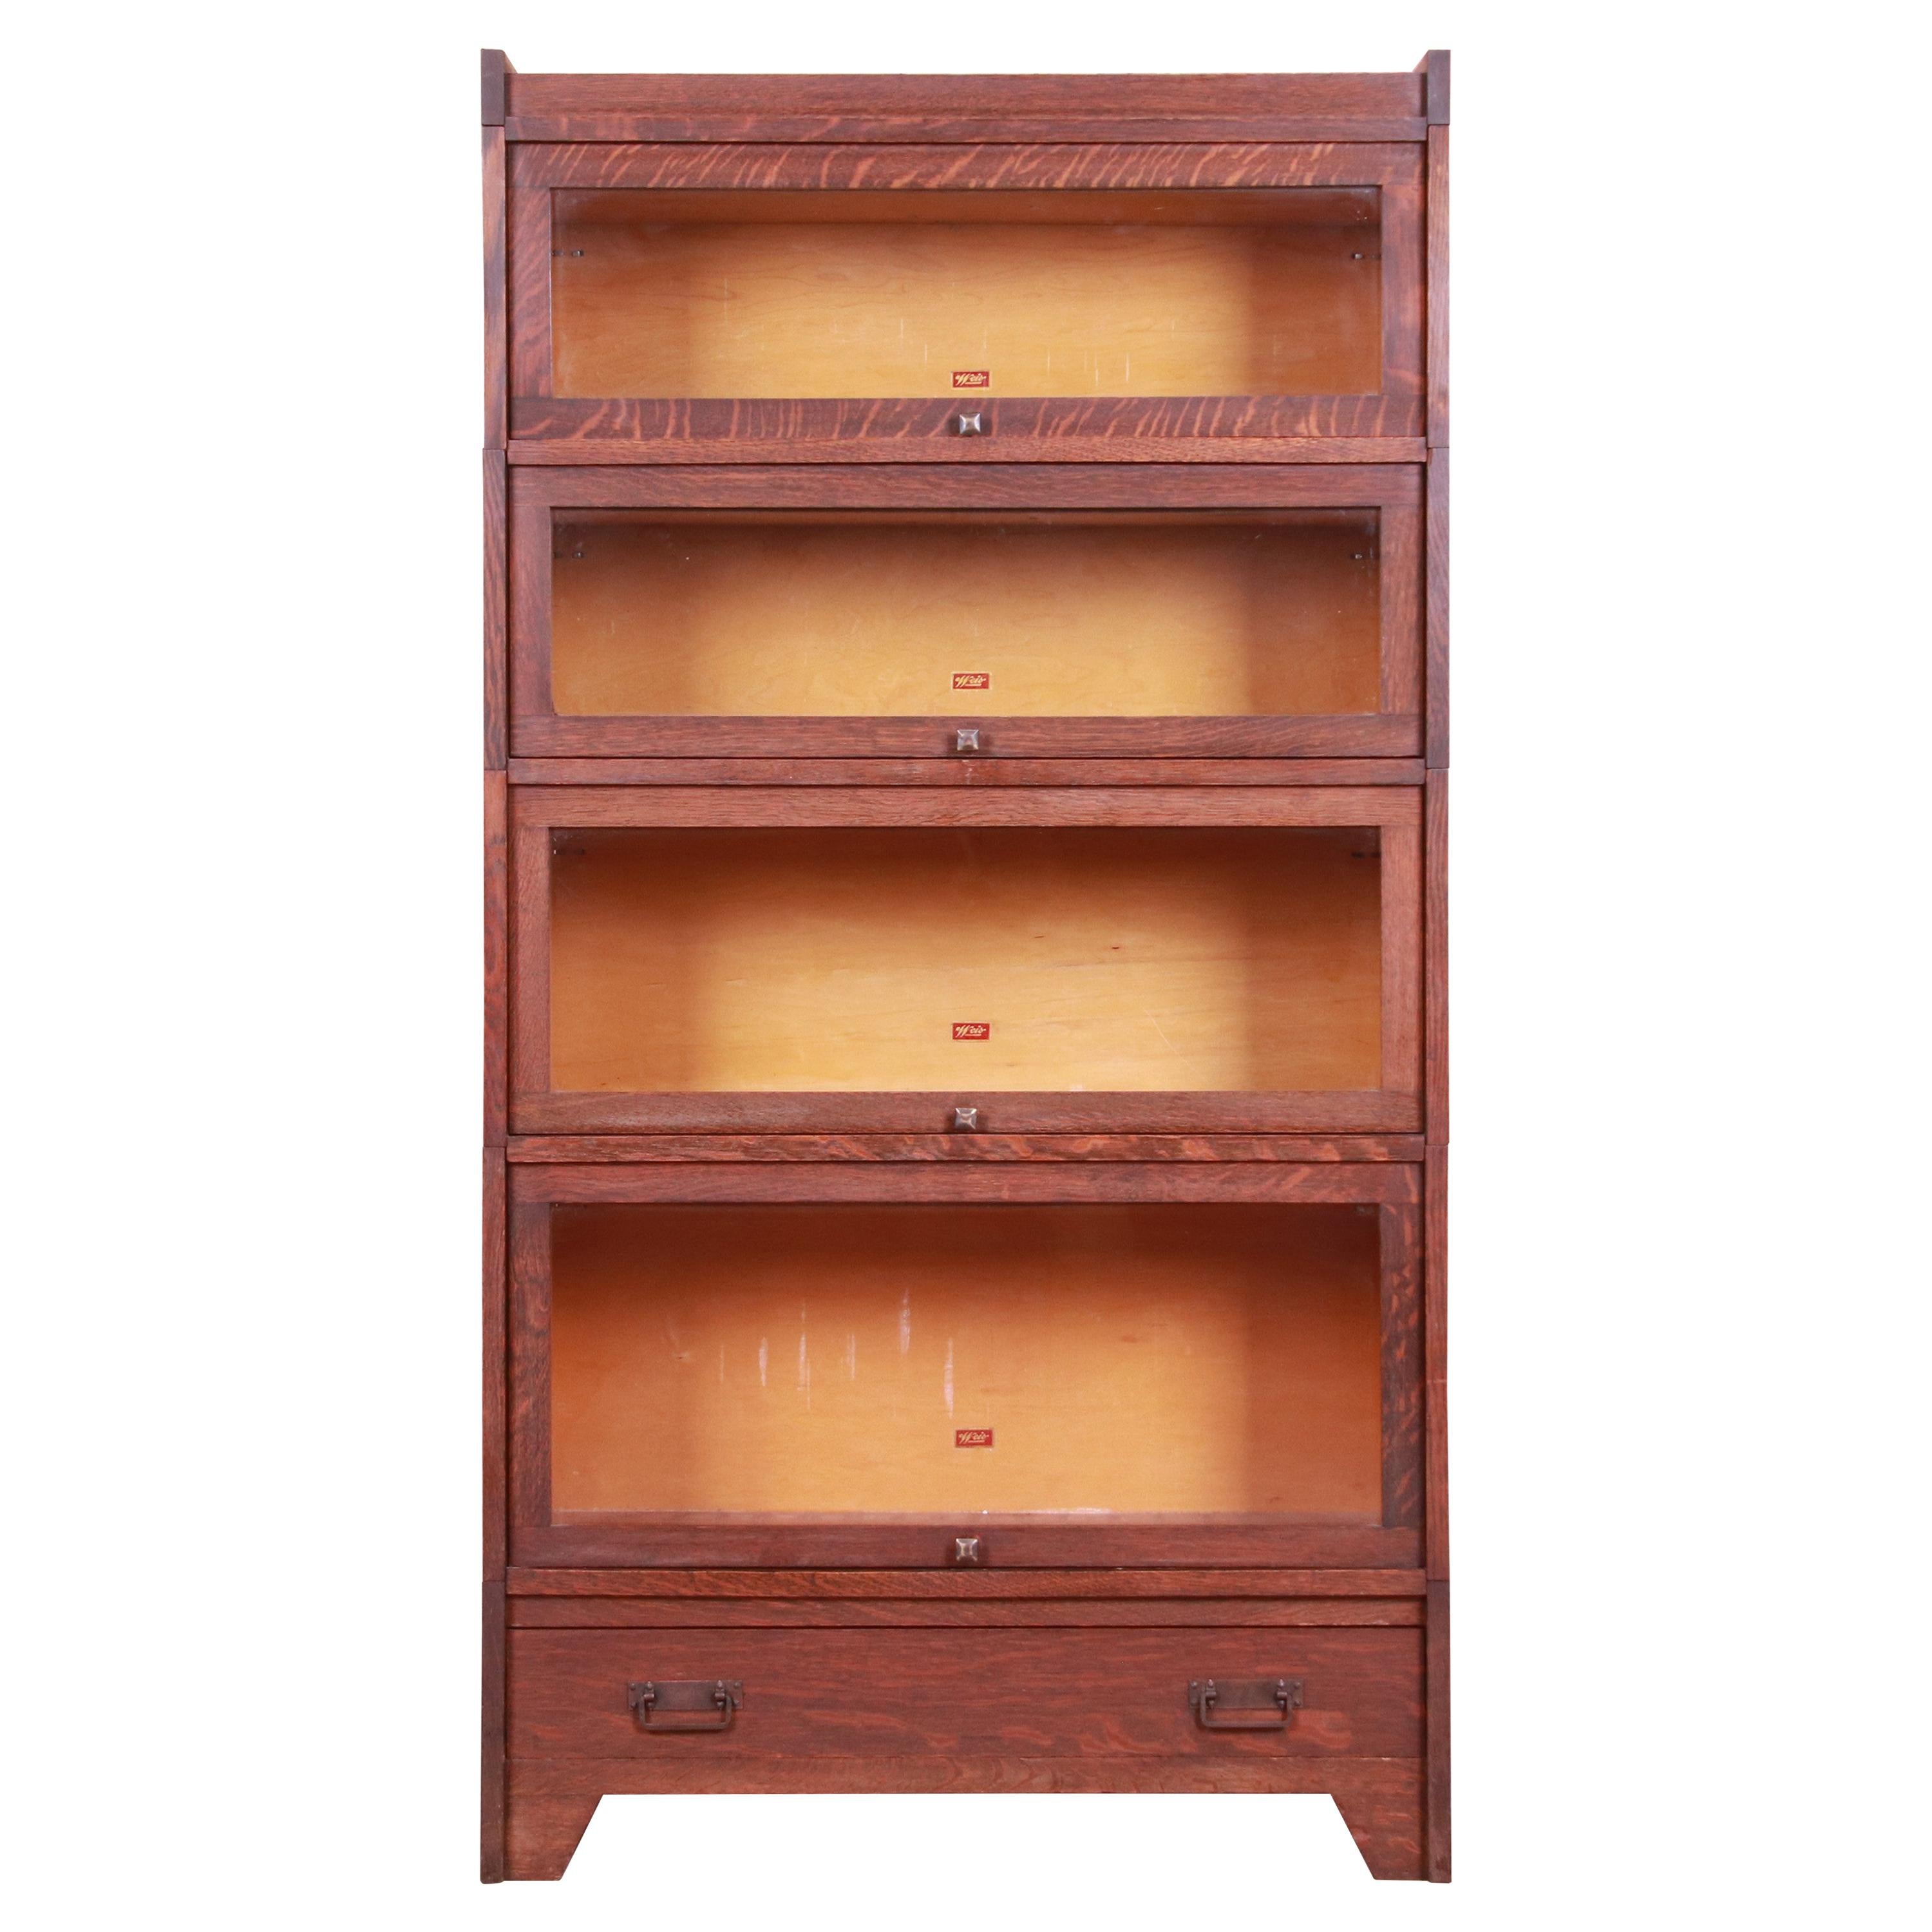 Mission Oak Arts & Crafts Four-Stack Barrister Bookcase by Weis, Circa 1900